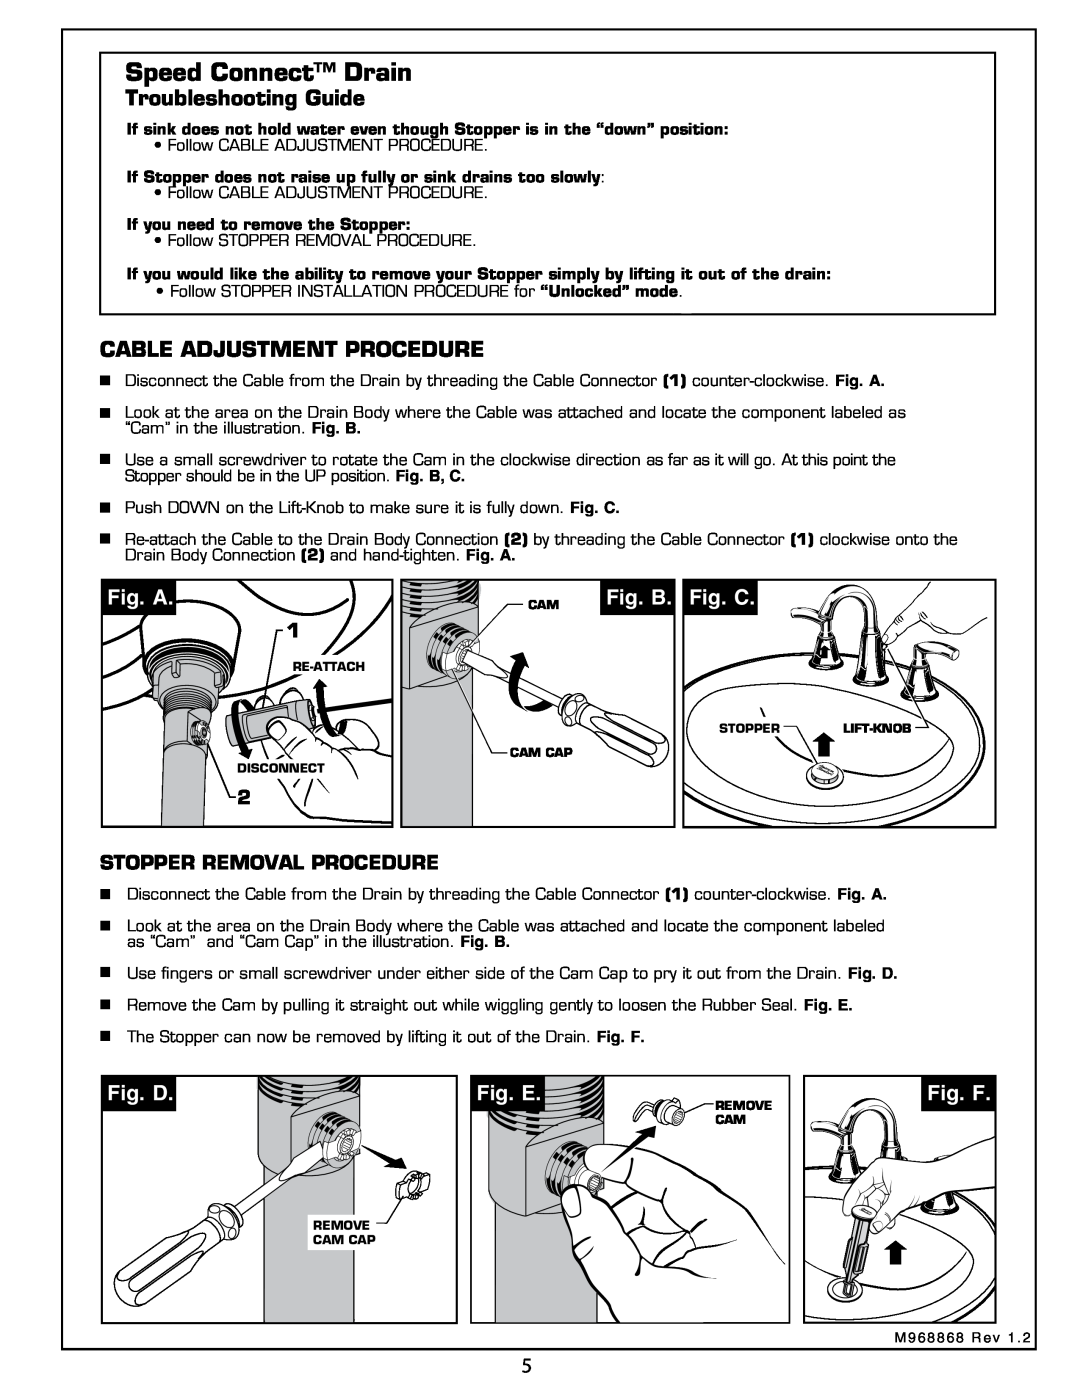 American Standard 7038 Fig. A, Fig. B, Fig. C, Fig. D, Fig. E, Fig. F, Speed Connect Drain, Stopper Removal Procedure 